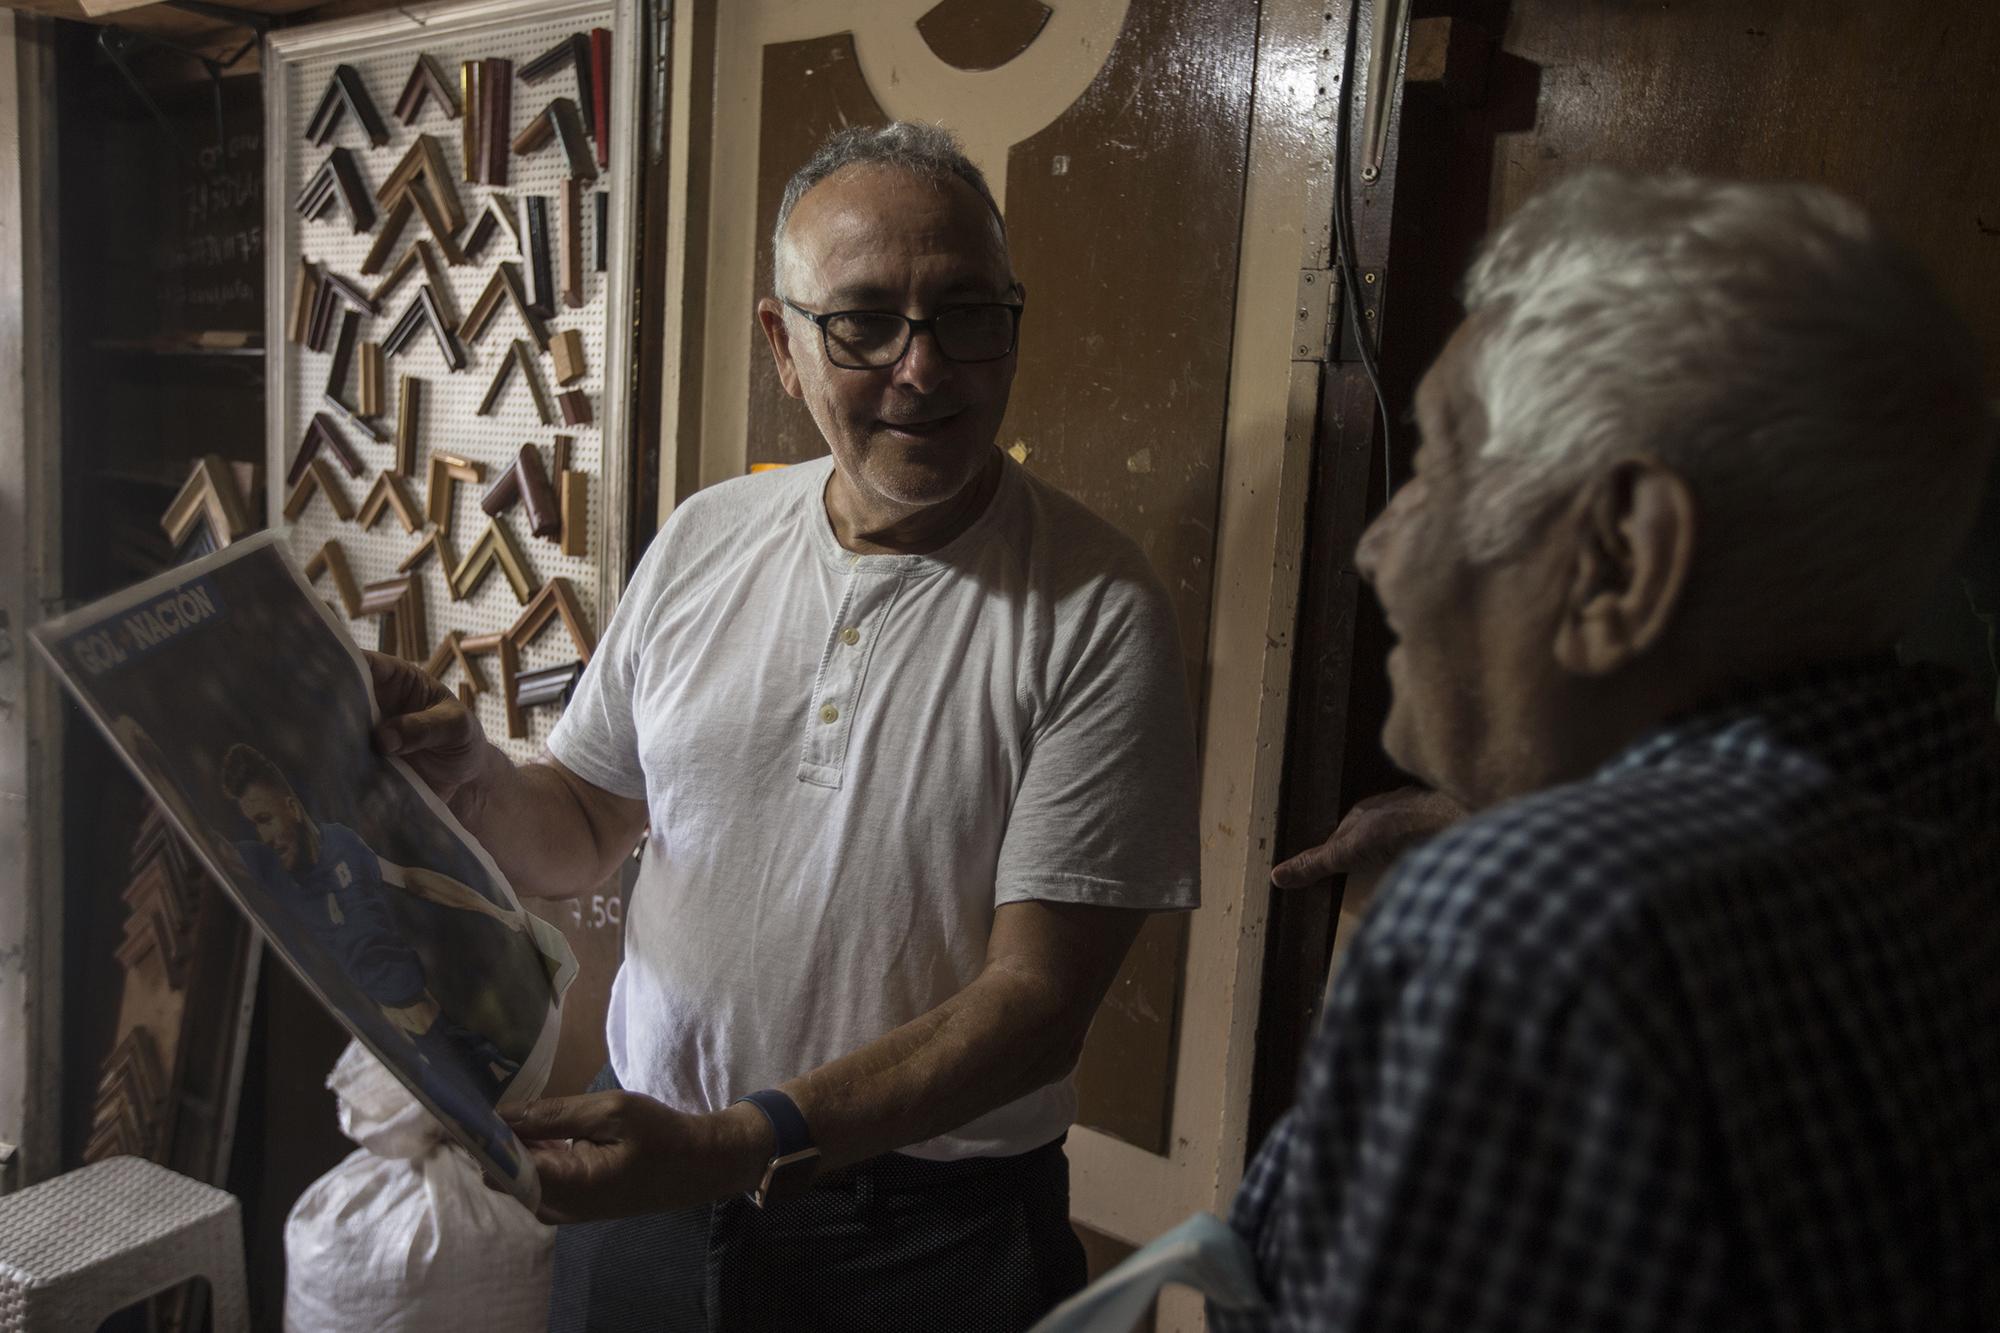 After 48 years in the United States, Carlos Zavaleta, father of centerback Eriq Zavaleta, returned to El Salvador to watch his son play for La Selecta. The next day he visited his old home in Santa Ana where, to his shock, he found his uncle Héctor Armando Sánchez, 91, who he no longer remembered. “This is another country to me,” he said.